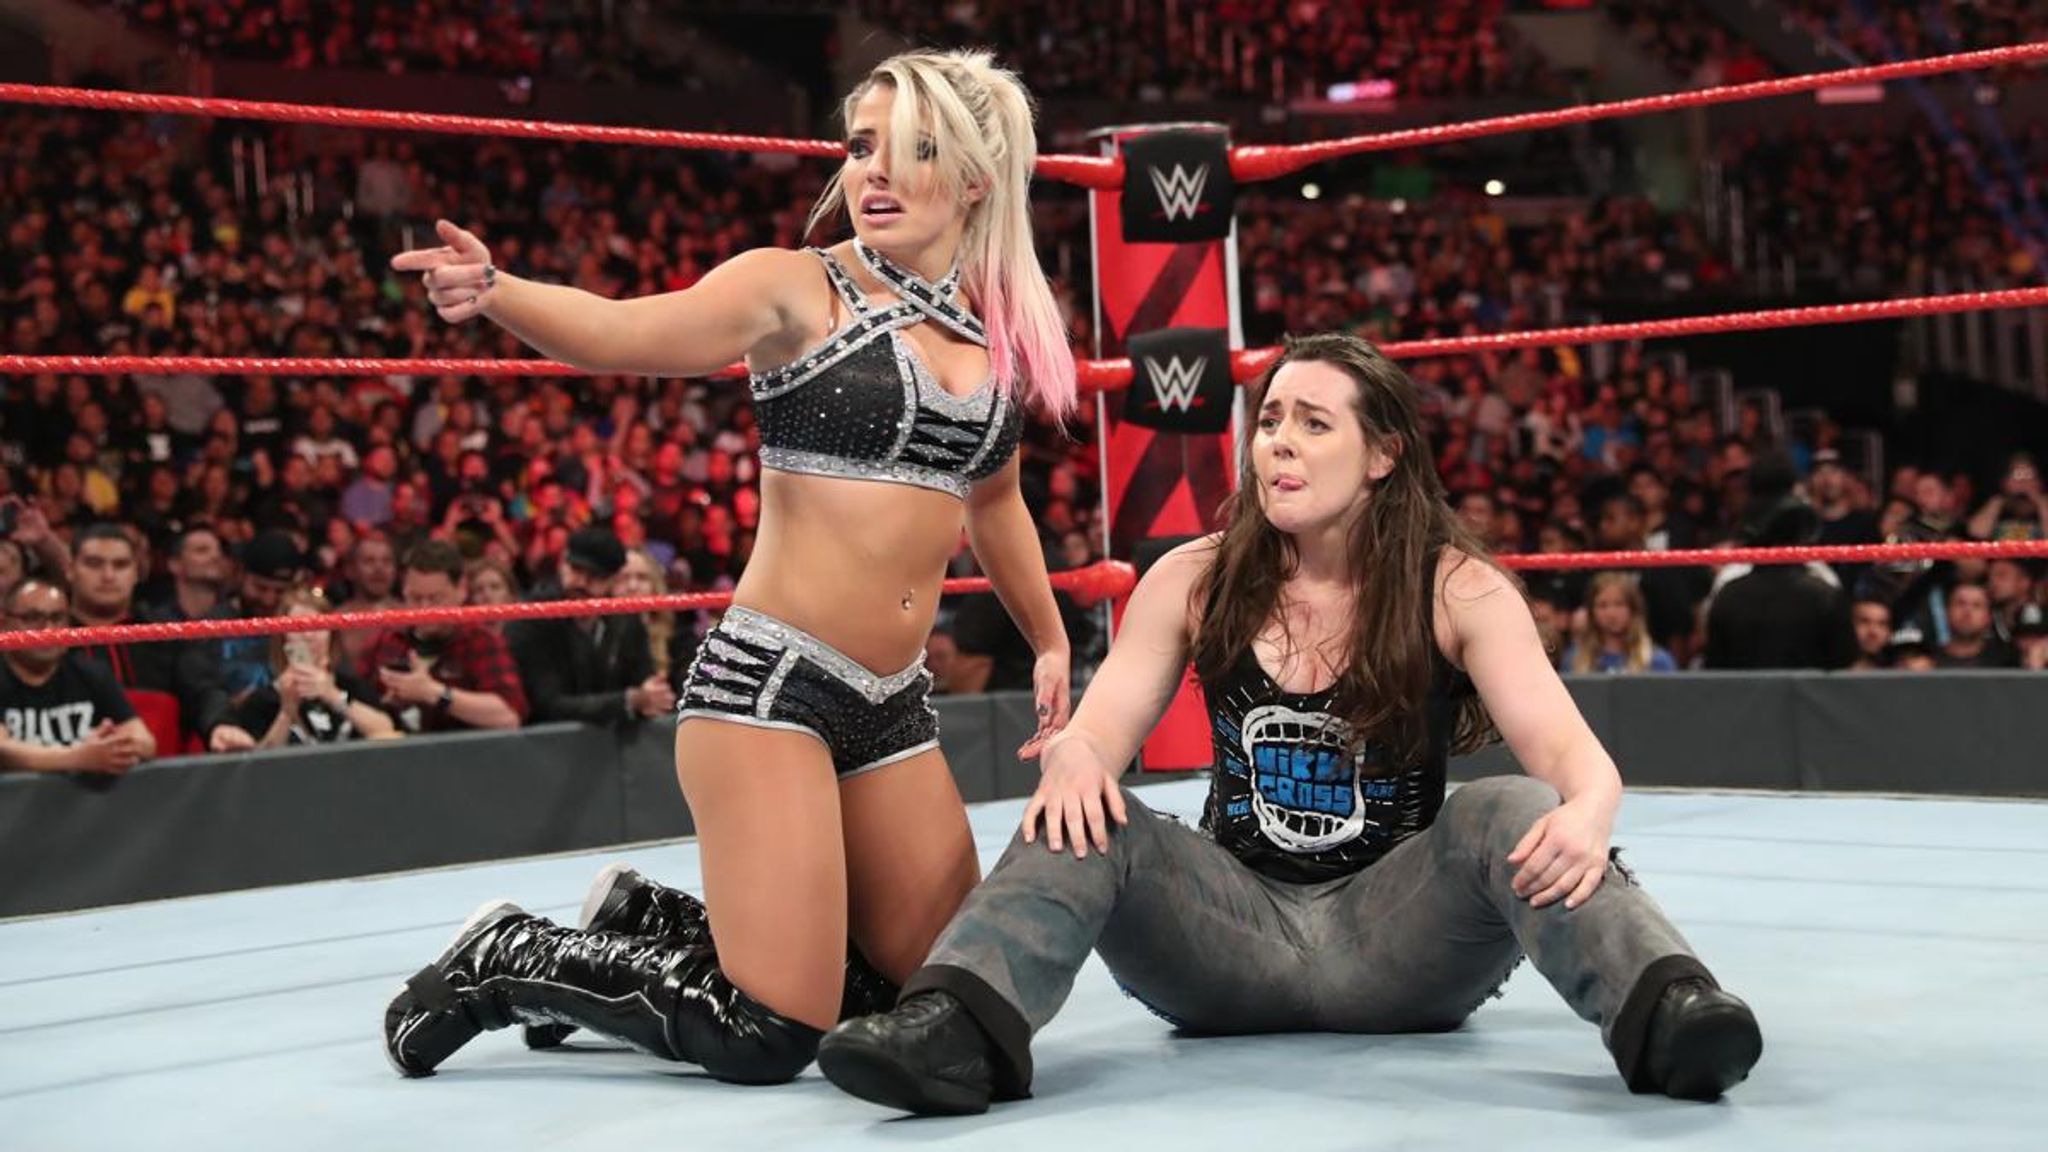 Bliss: I thought my WWE career was over after concussion injuries | WWE | Sky Sports